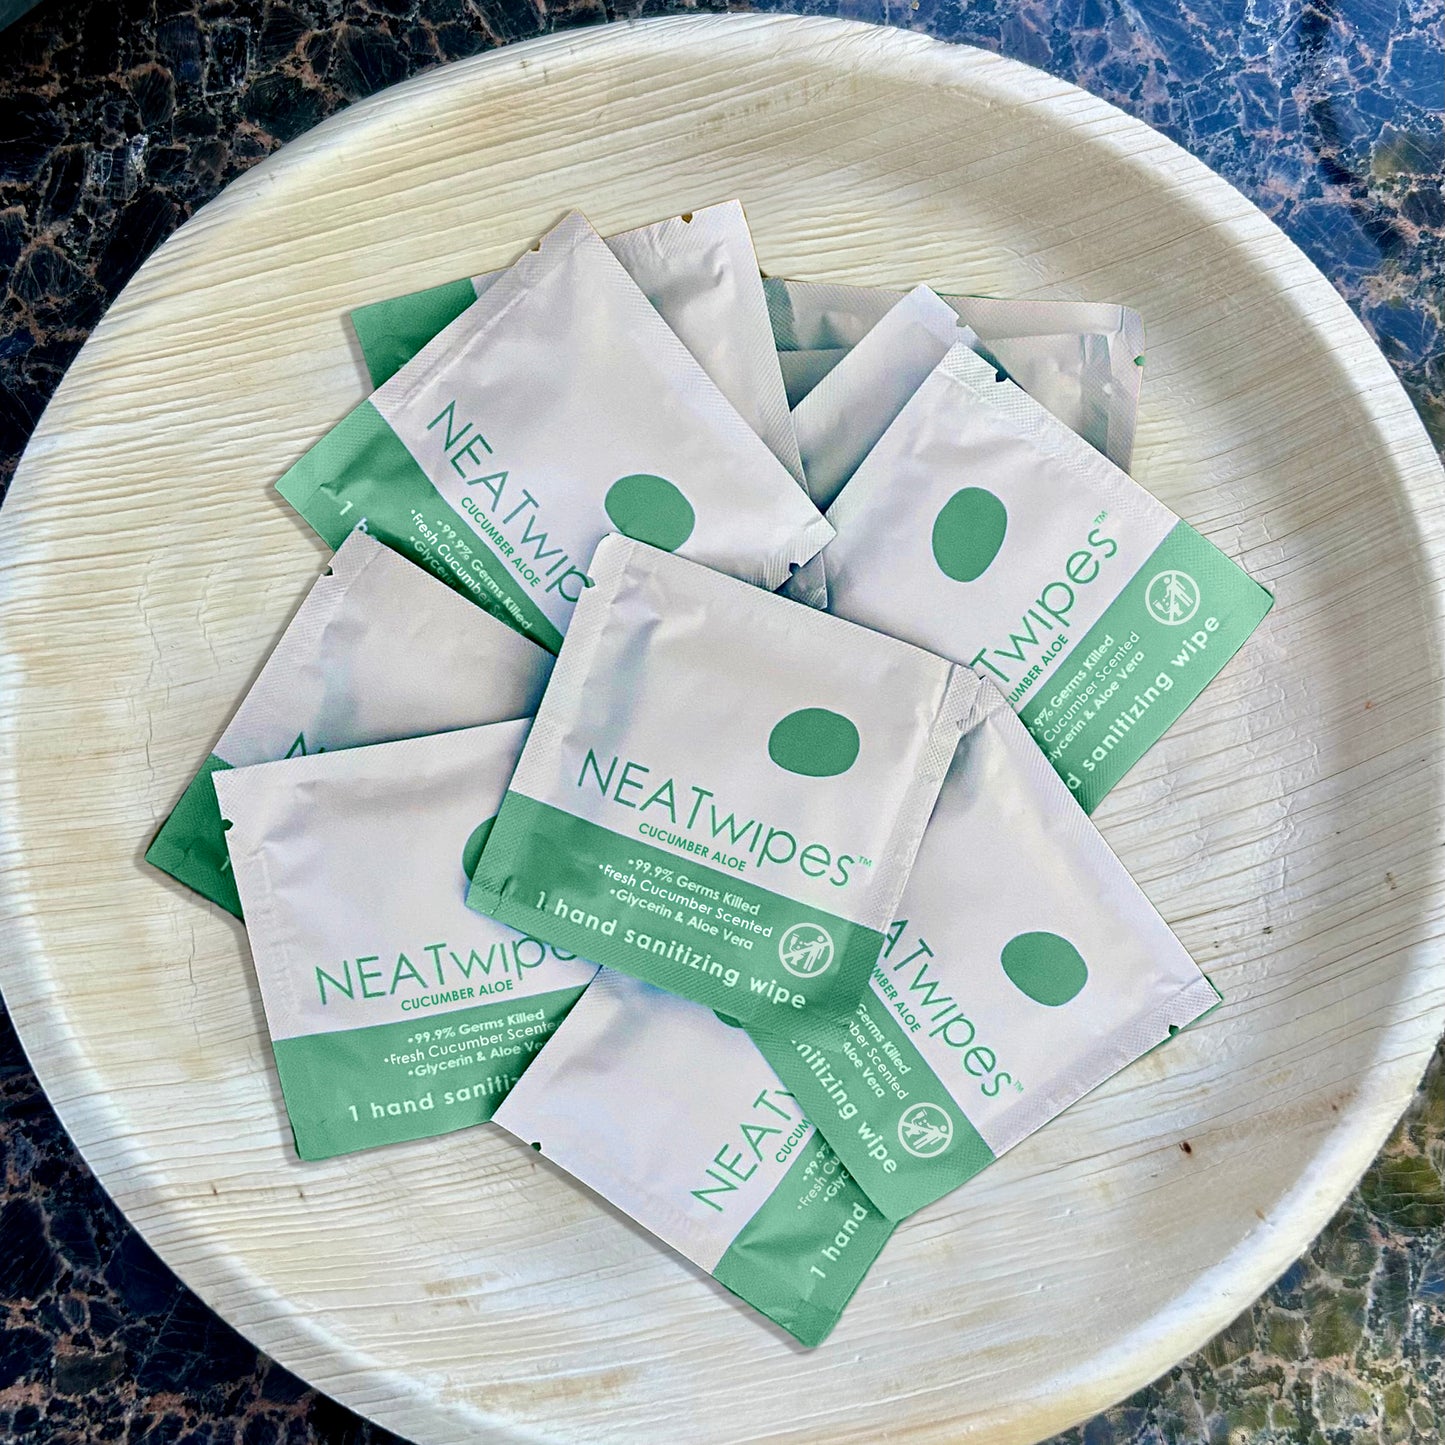 NEATwipes Cucumber Aloe hand wipes on a plate.